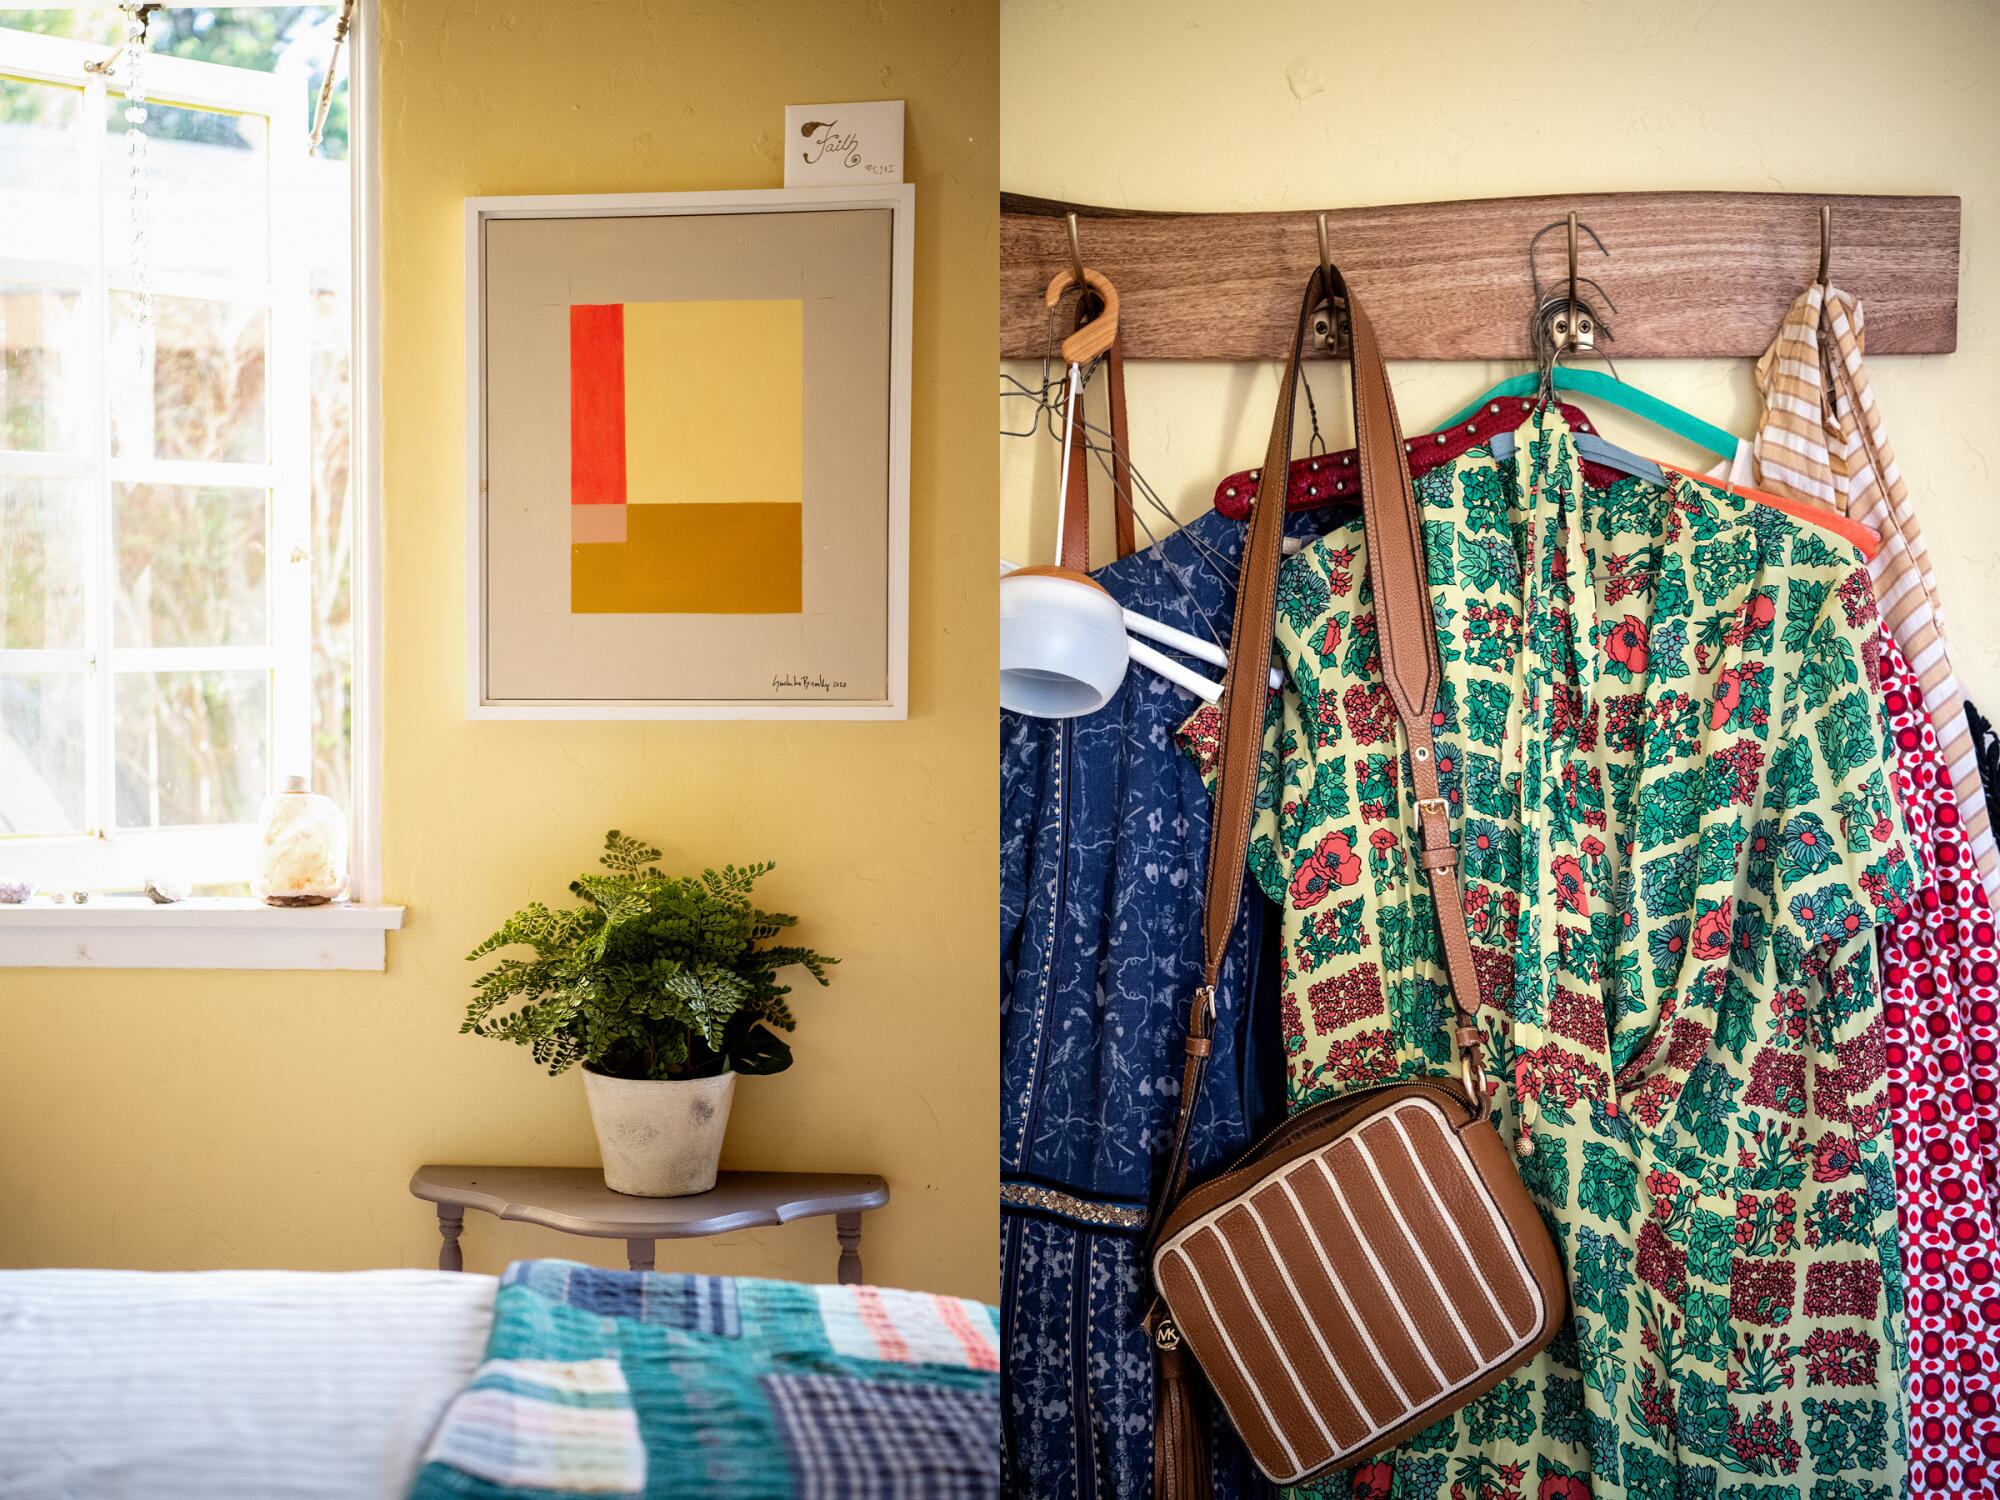 Two photos side by side, one of a window and a plant on a table, left, and a coatrack with clothing and a purse, right.